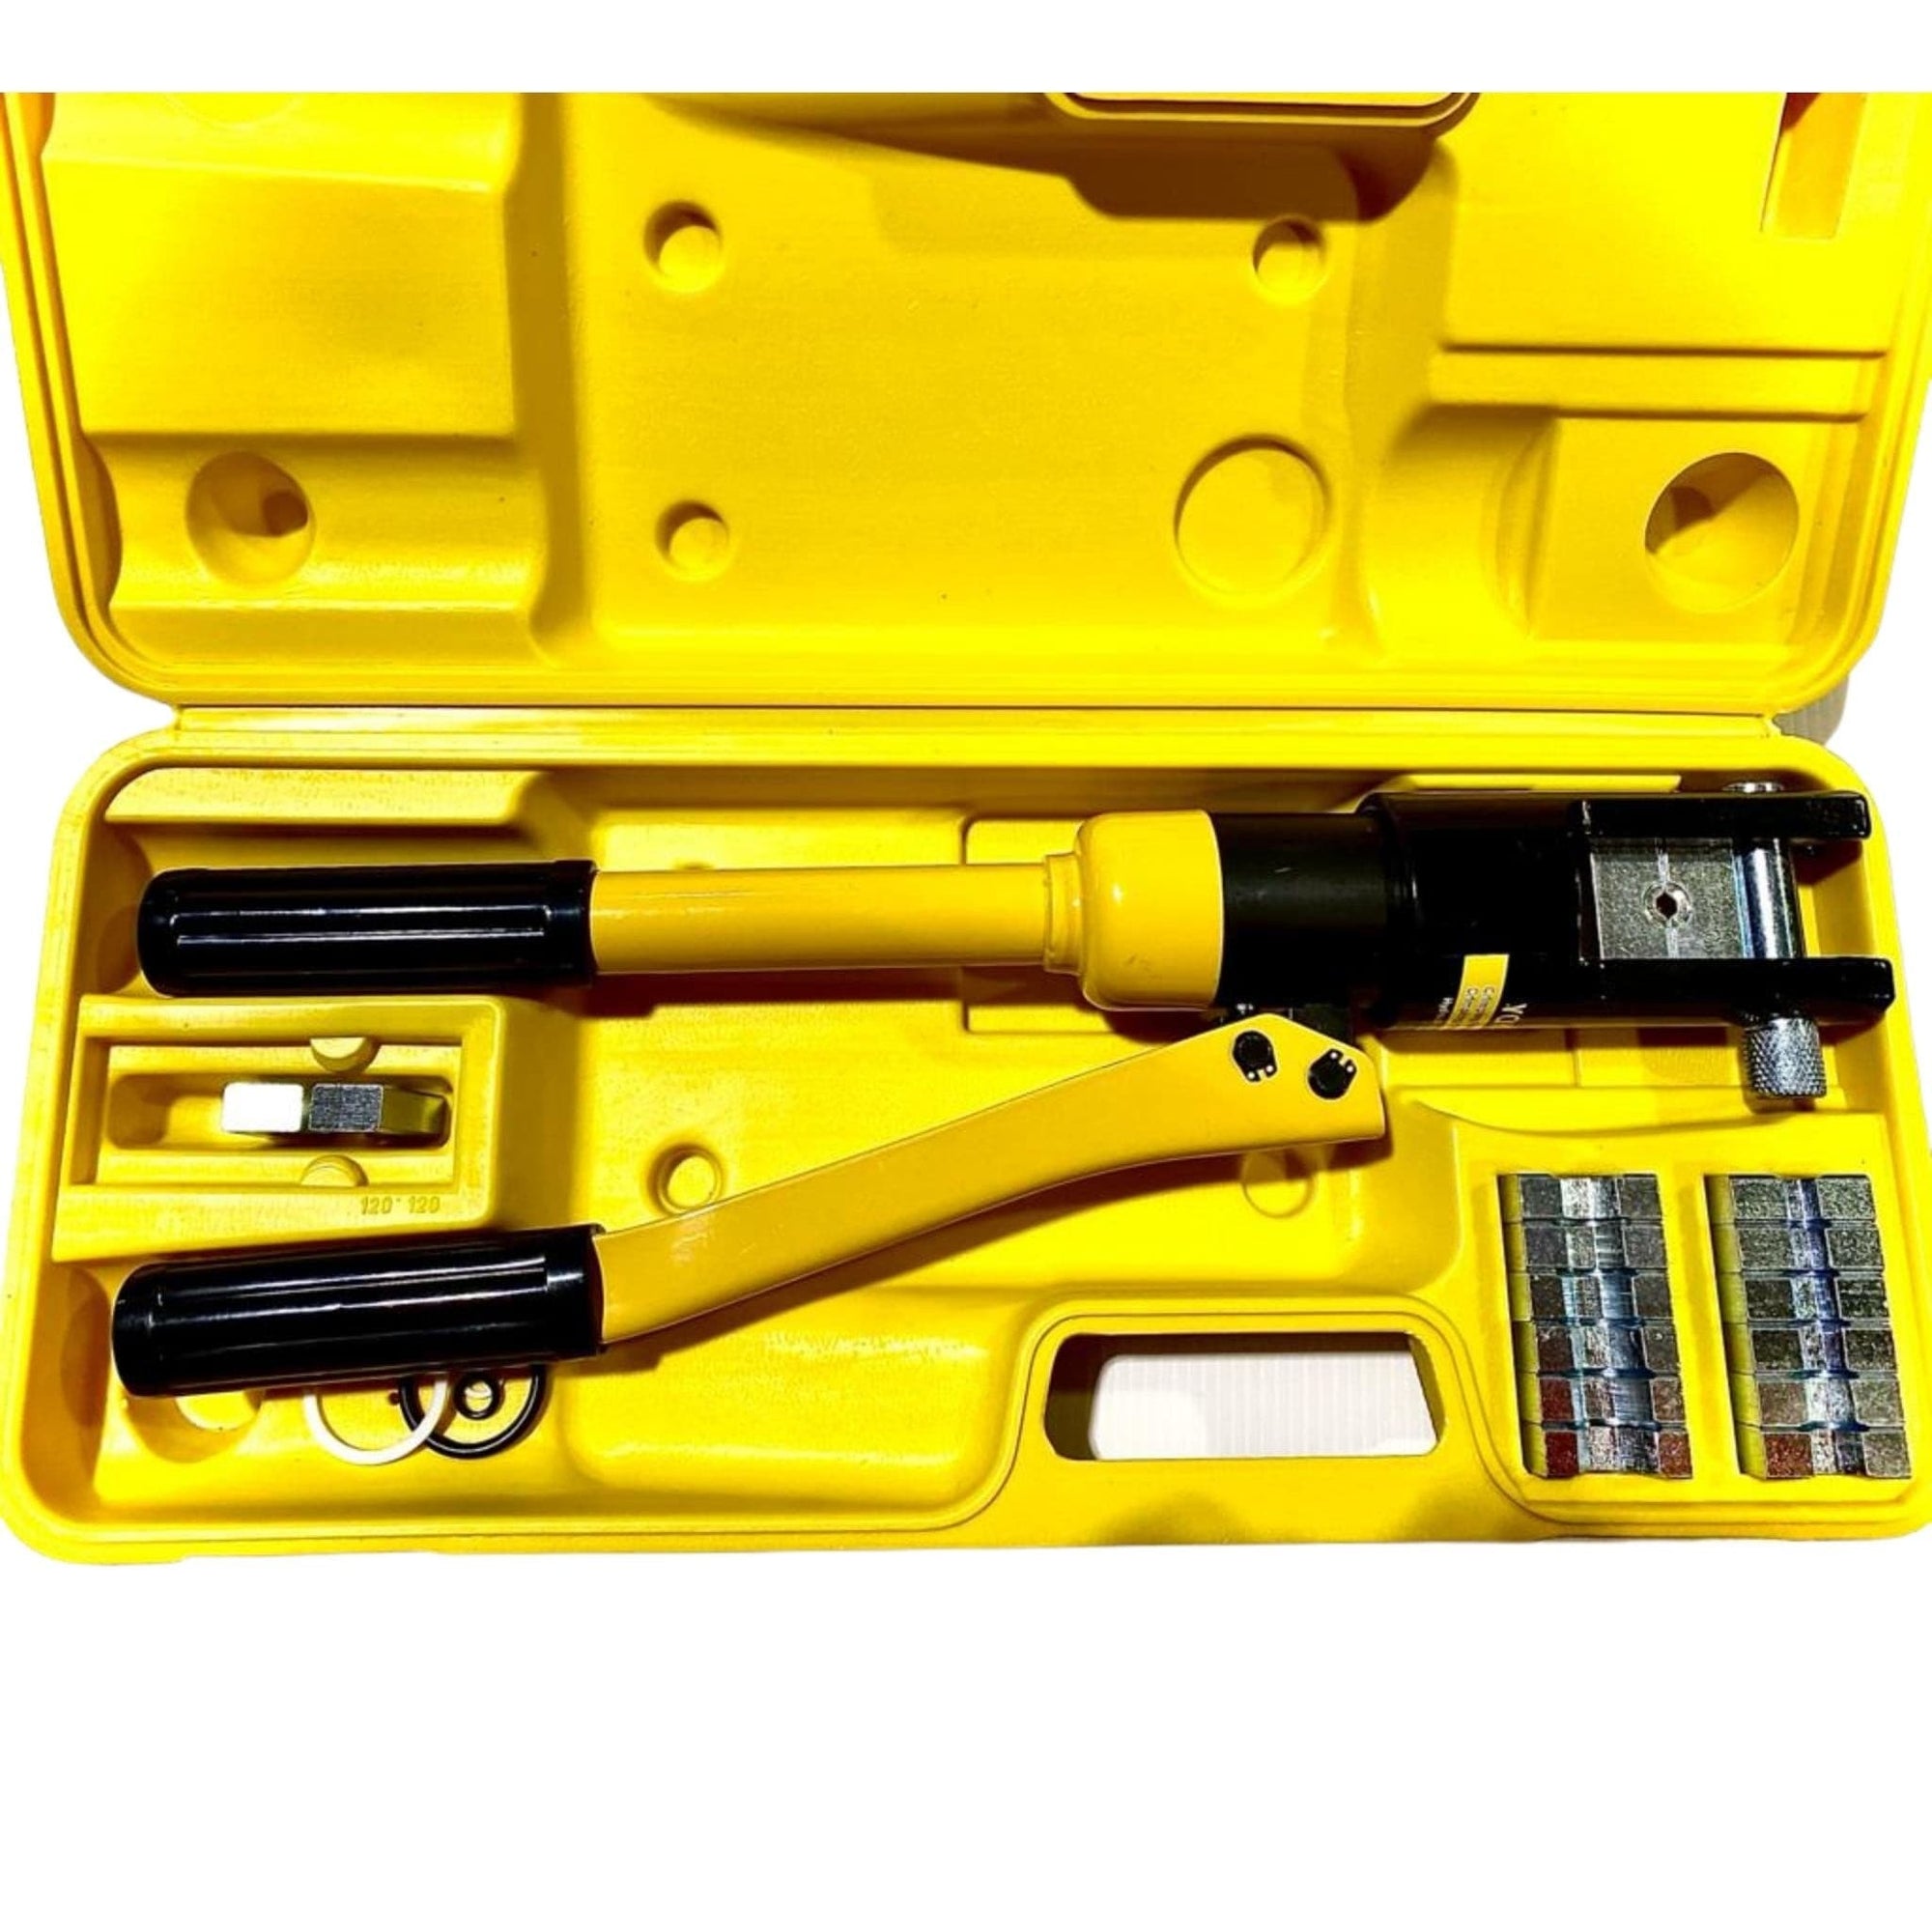 Hydraulic Crimping Tool - 8 Ton | 10-120mm² - South East Clearance Centre